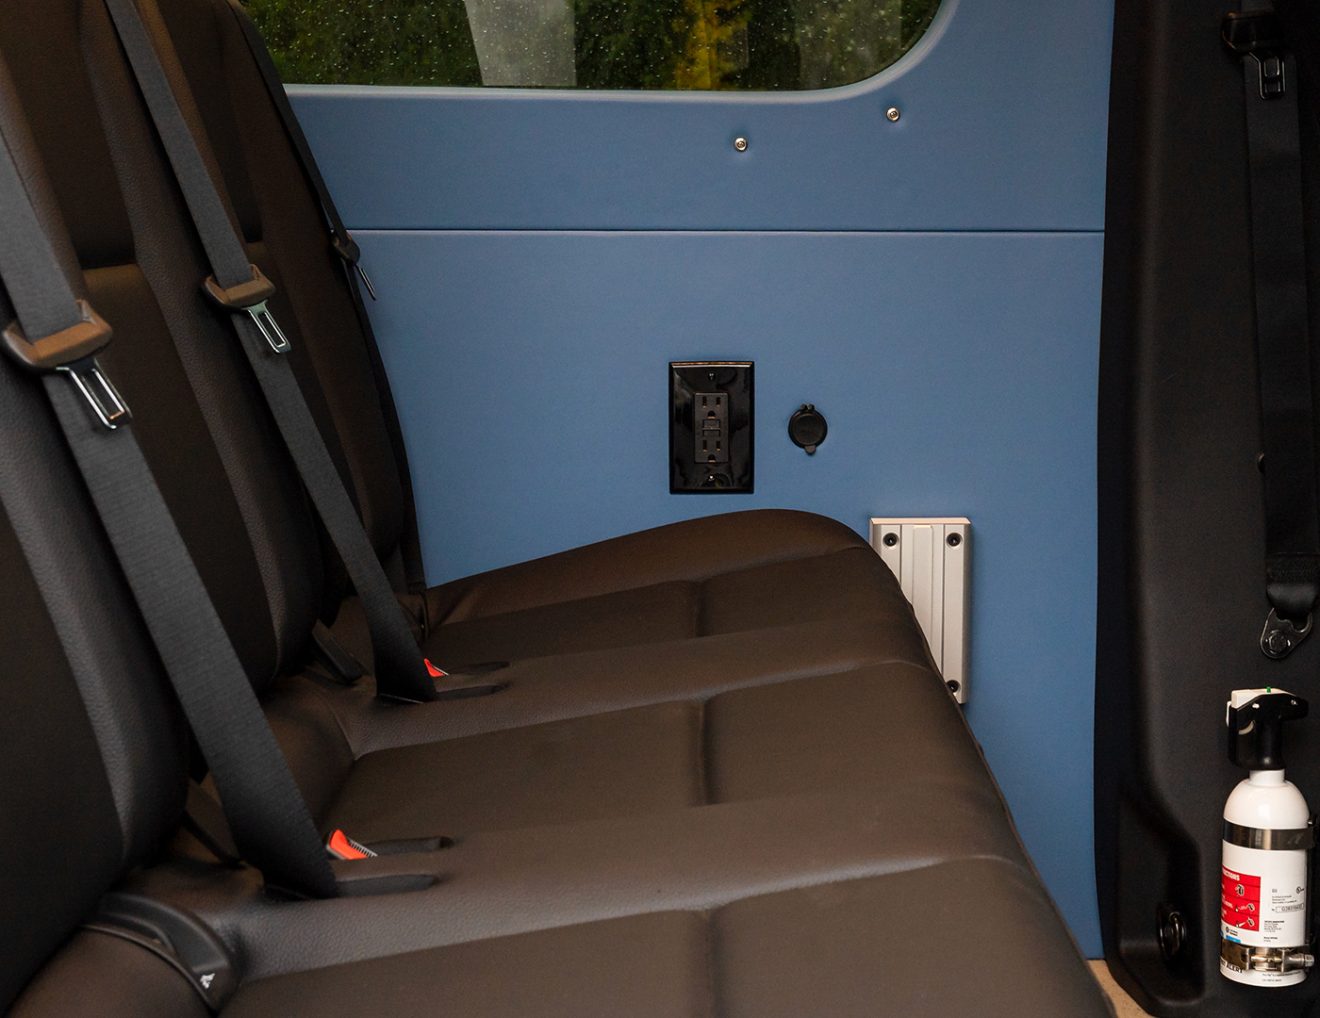 2020 Mercedes-Benz Sprinter 170 High Roof 4WD dot-approved captain's chairs and outlet access